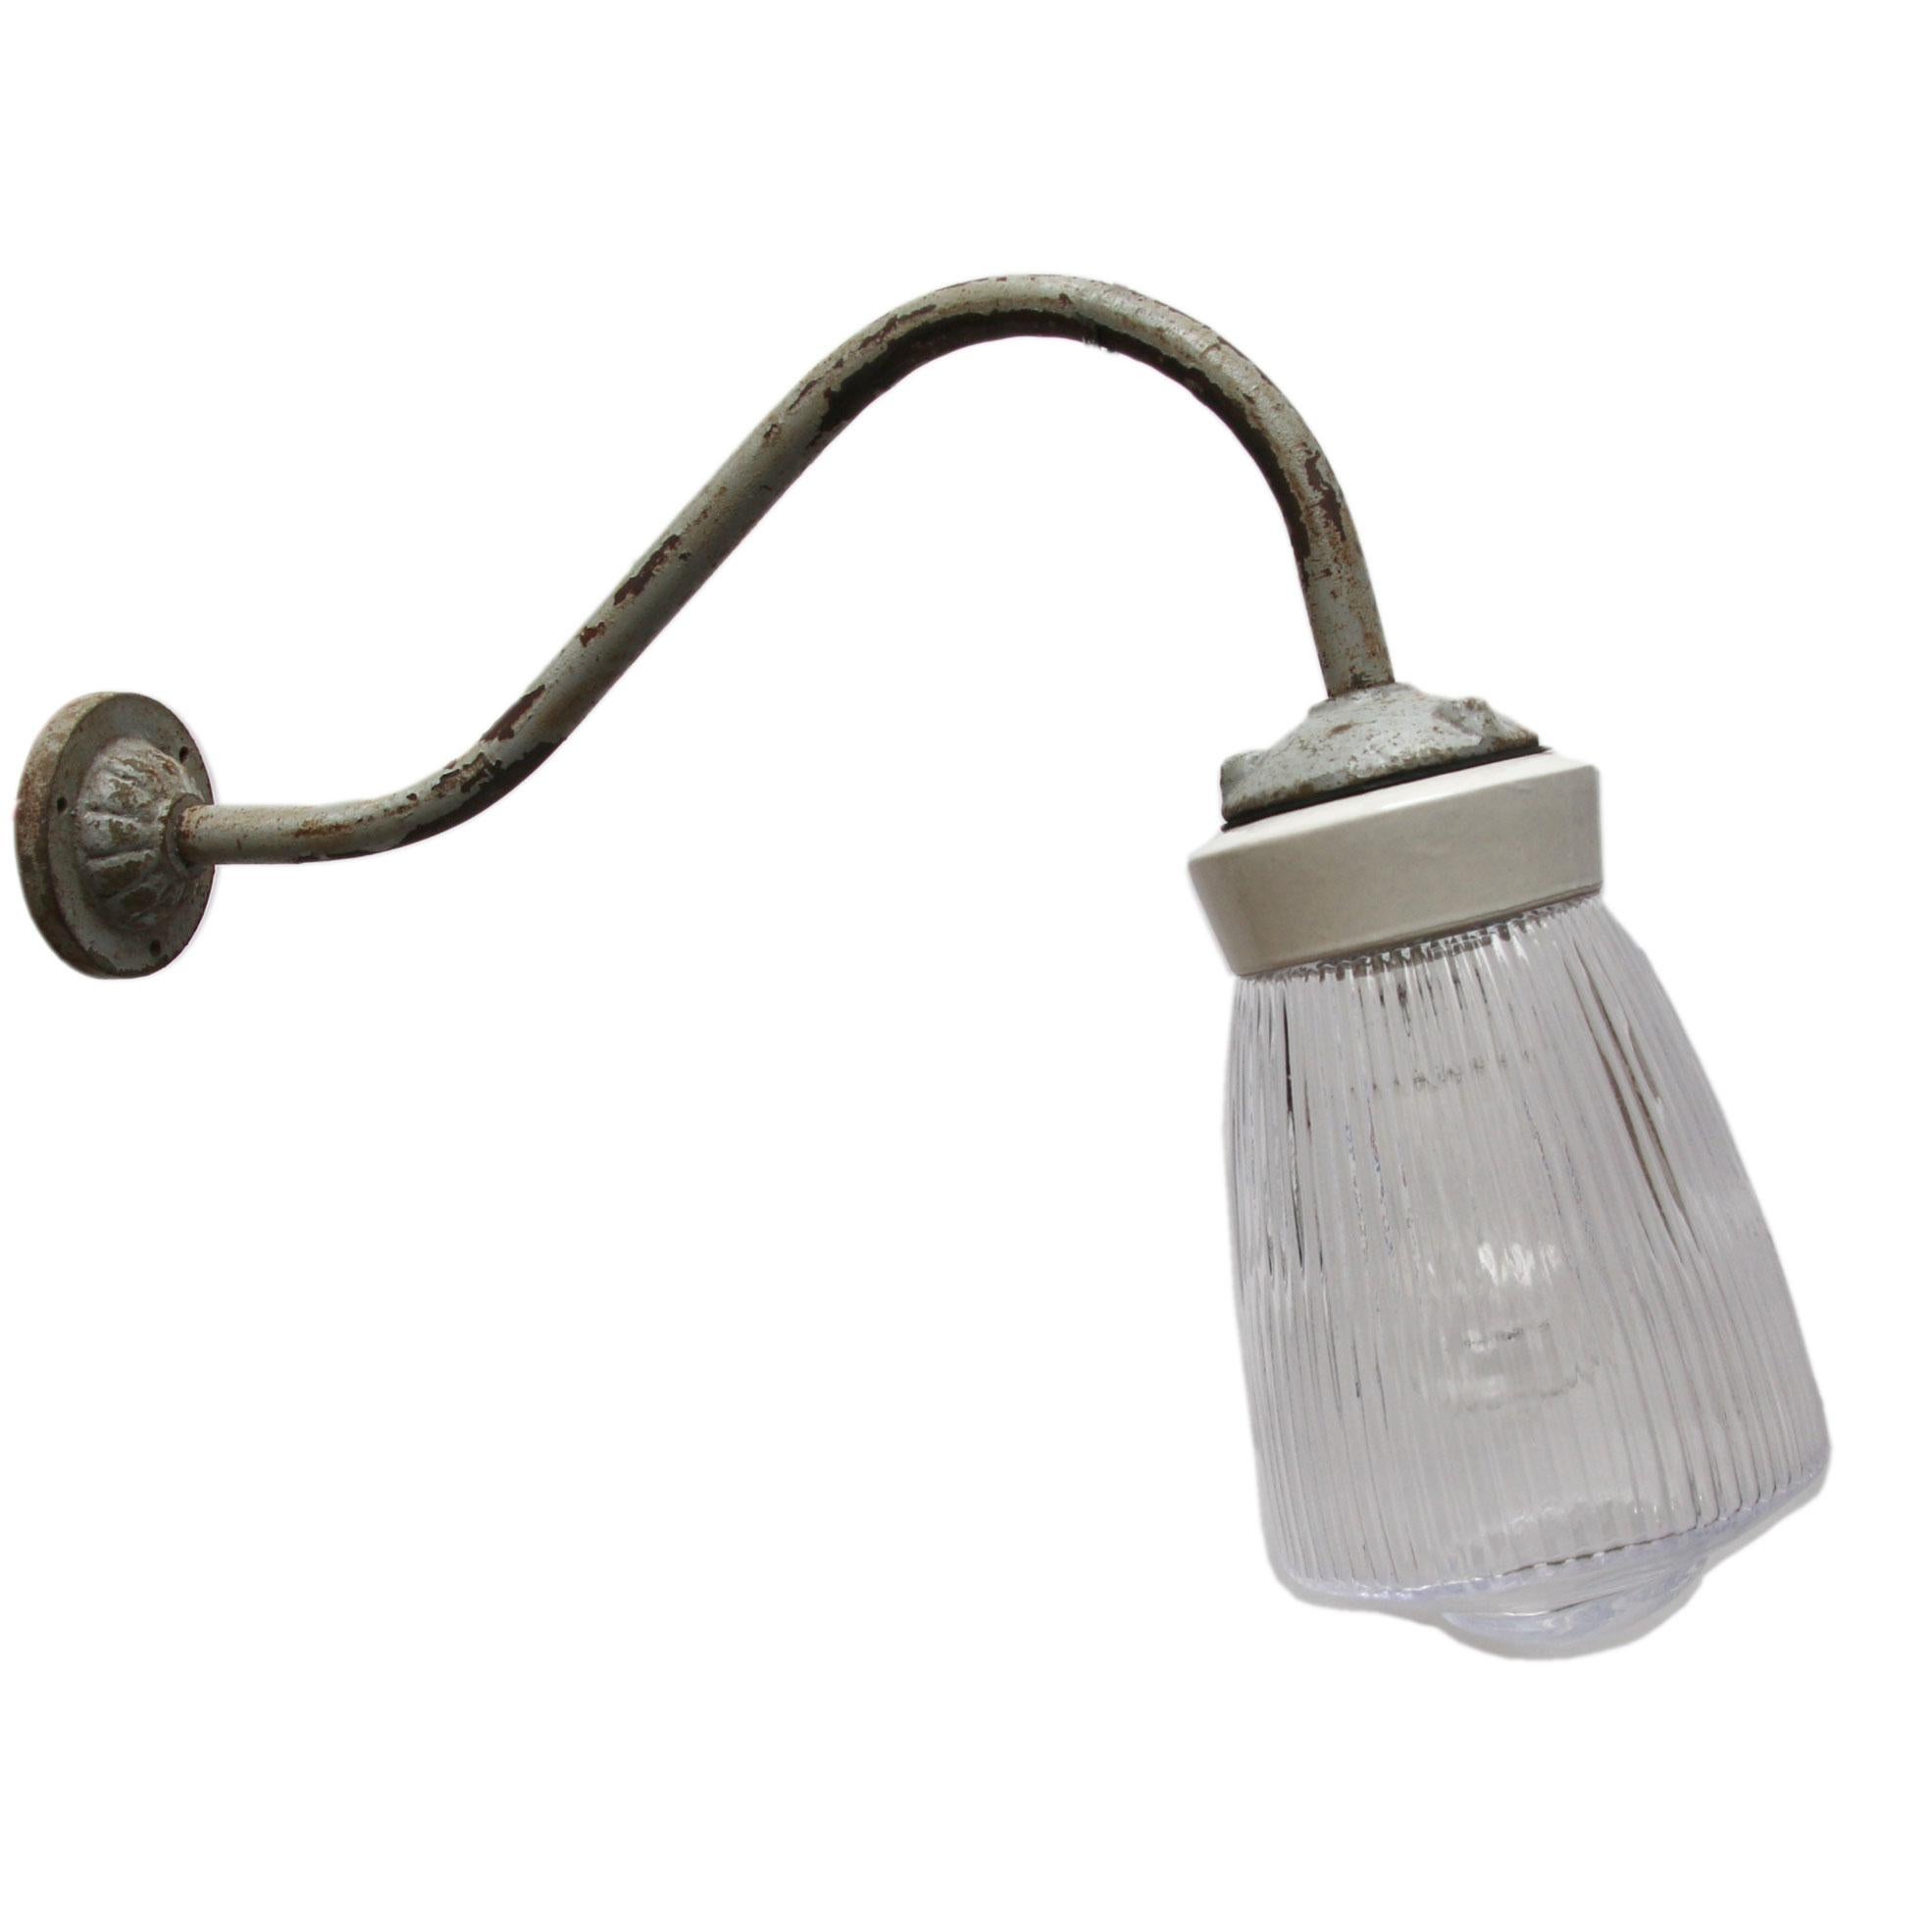 Industrial wall light.
Cast iron and porcelain top, clear ribbed Holophane glass.
Diameter cast iron wall mount: 9 cm, 3 holes to secure.

Weight: 2.0 kg / 4.4 lb

Priced per individual item. All lamps have been made suitable by international